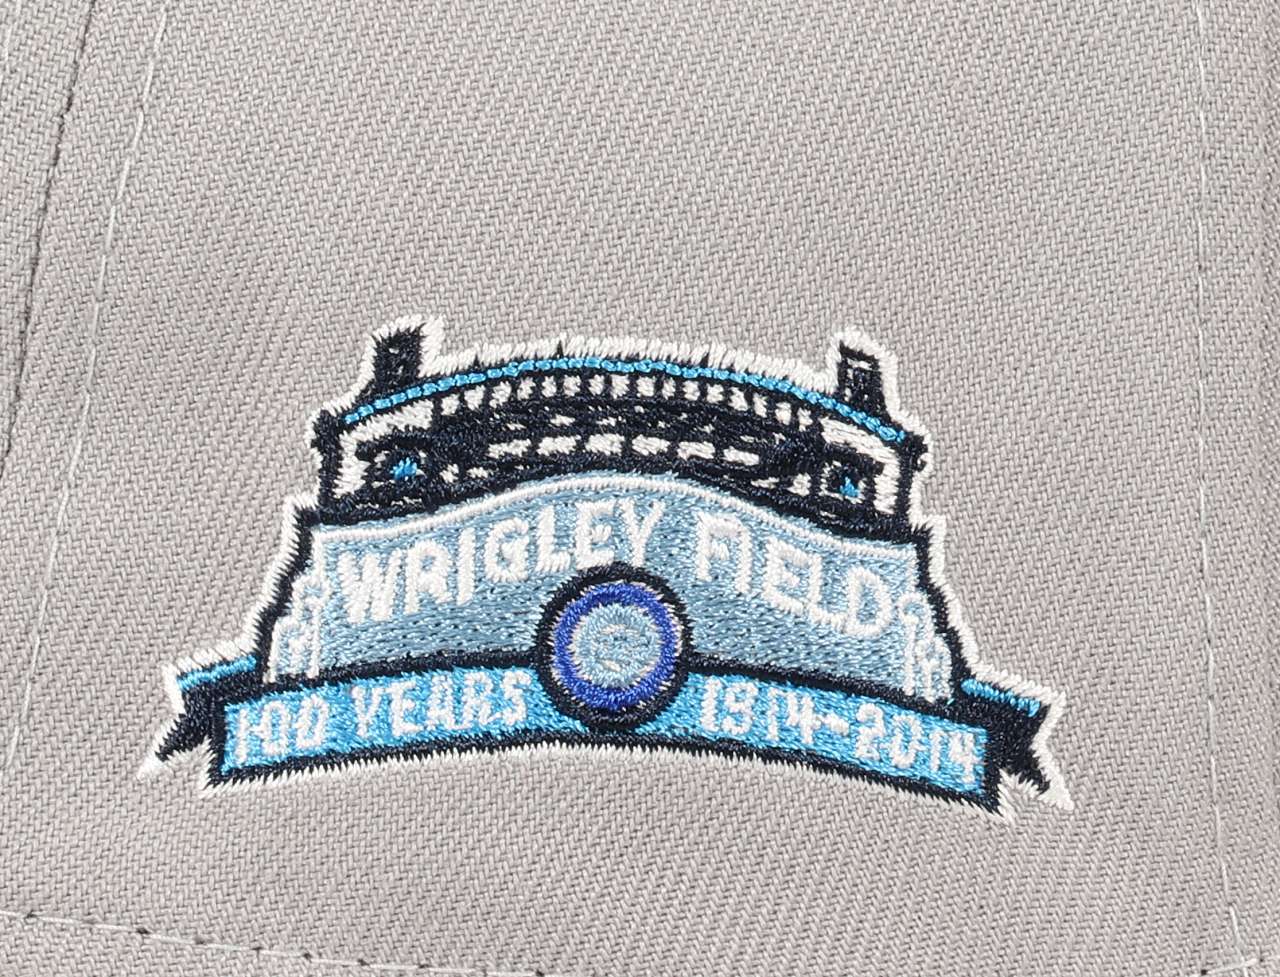 Chicago Cubs MLB 100 Years Wrigley Field Sidepatch Cooperstown Gray Sky 9Forty A-Frame Snapback Cap New Era